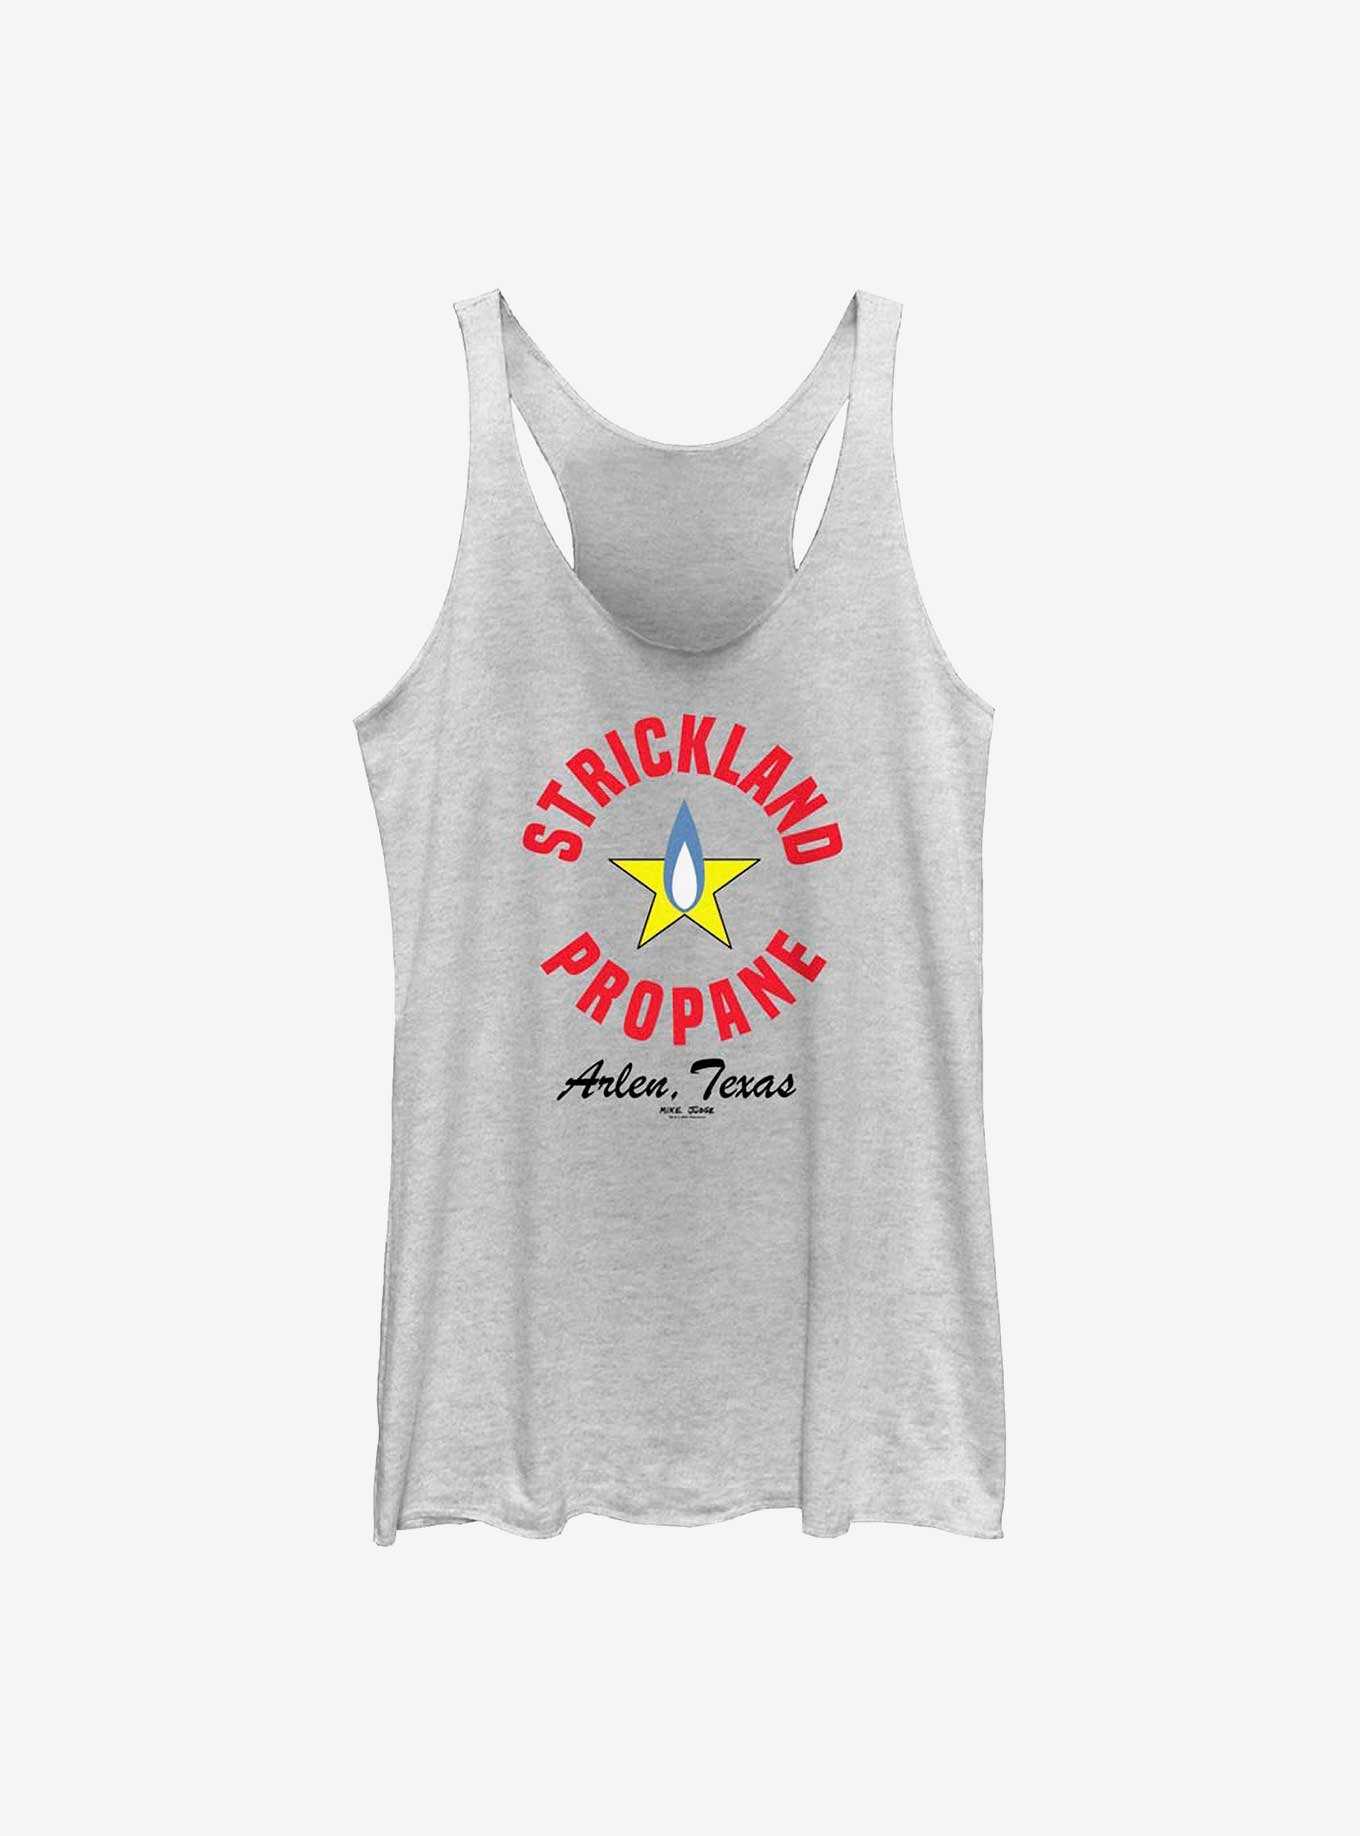 King of the Hill Strickland Propane Logo Girls Tank, , hi-res